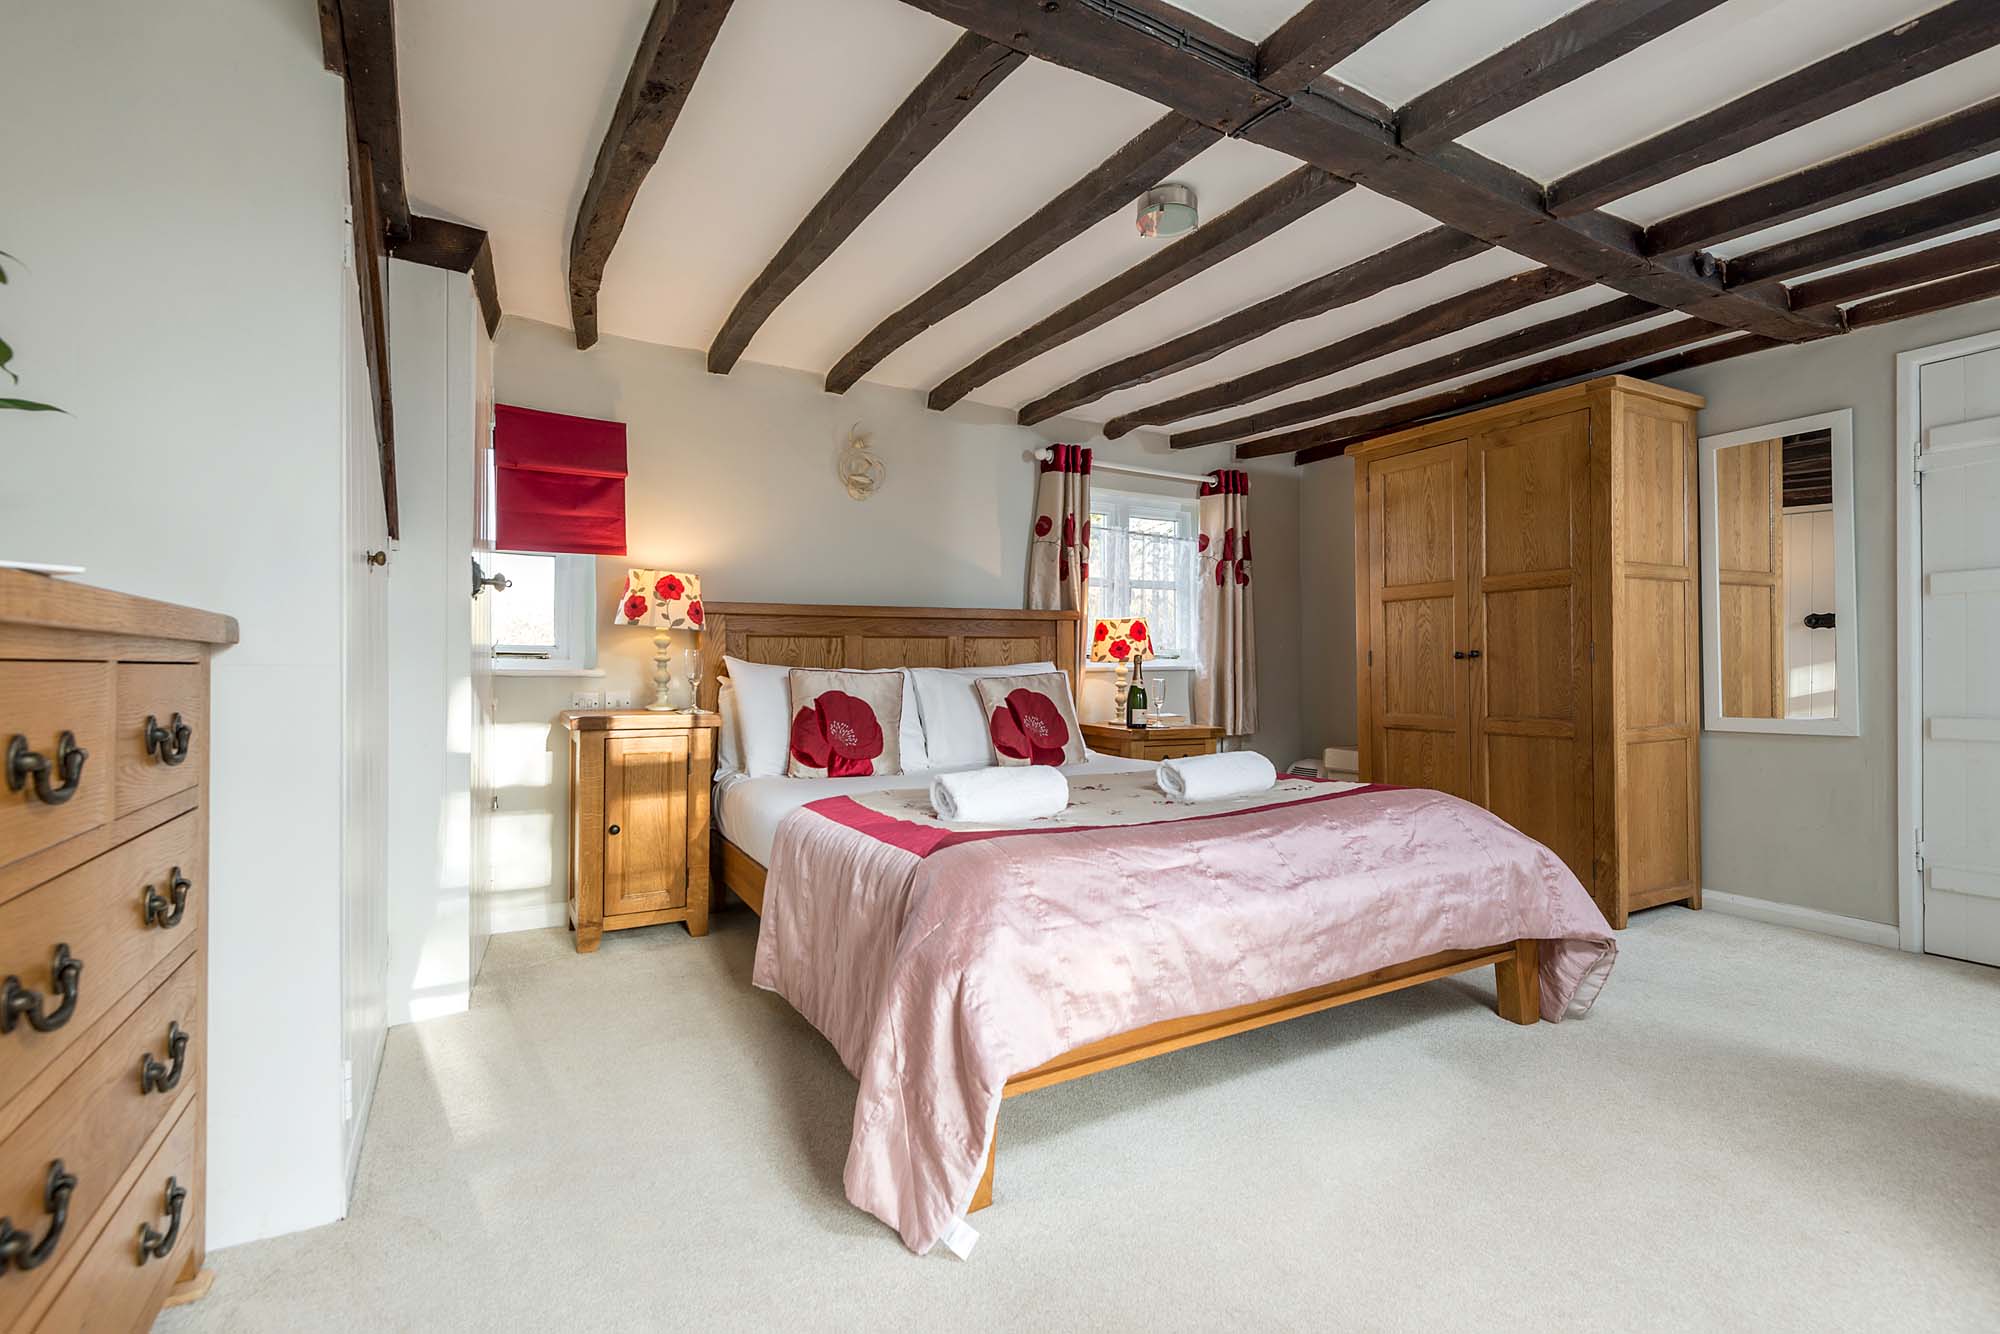 New Forest Cottage ensuite master bedroom Beck Cottage with red lamps and pillows